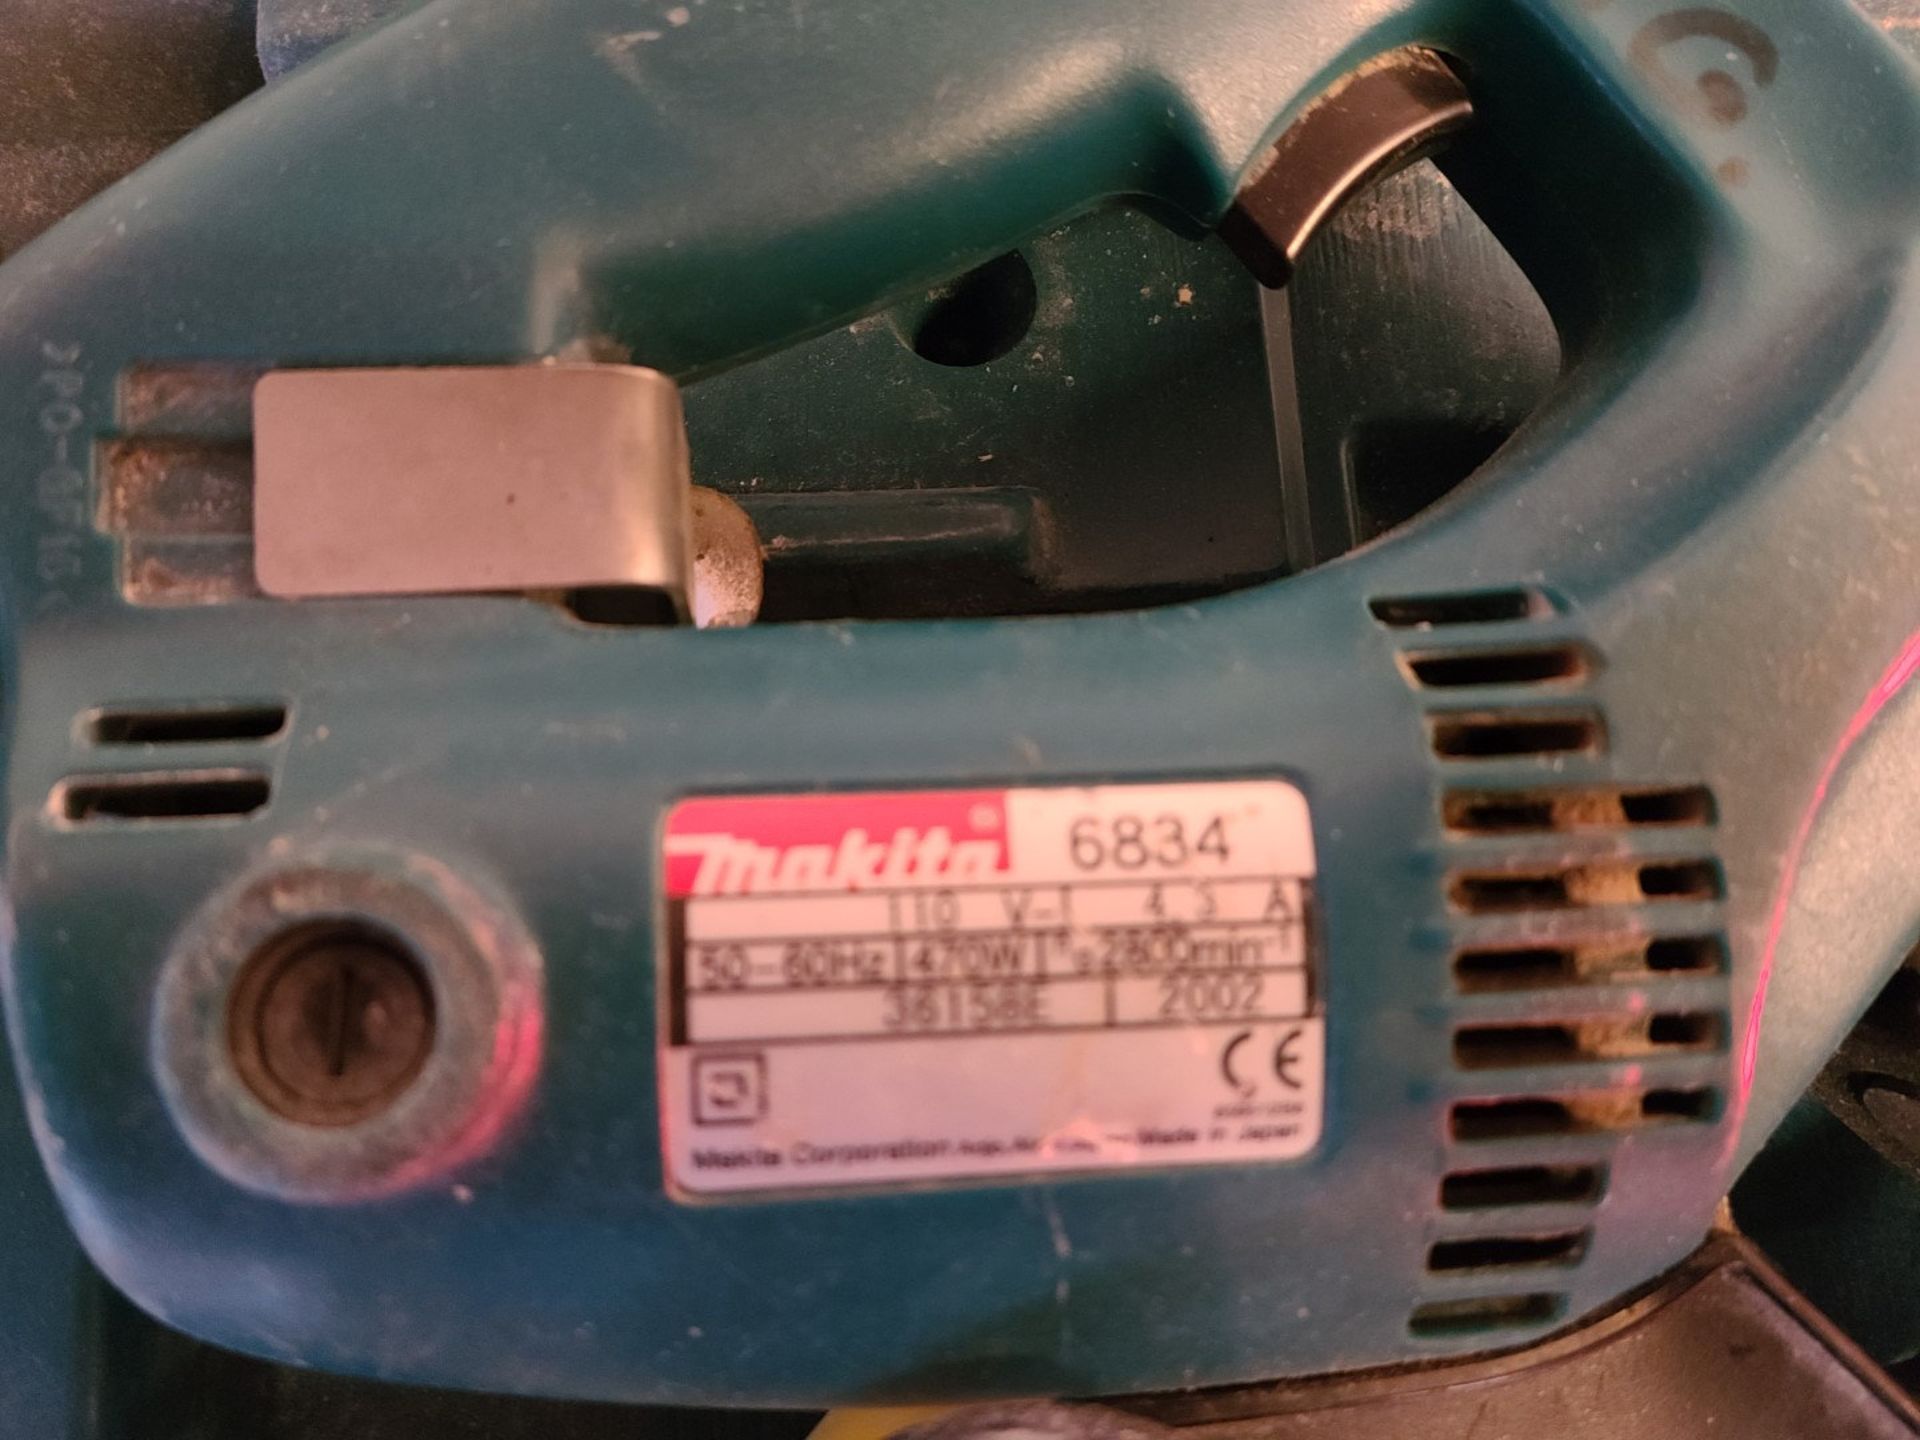 1 x Makita 6834 Auto Feed Screwdriver - Ref: CNT150 - CL846 - Location: Oxford OX2 - Image 3 of 5